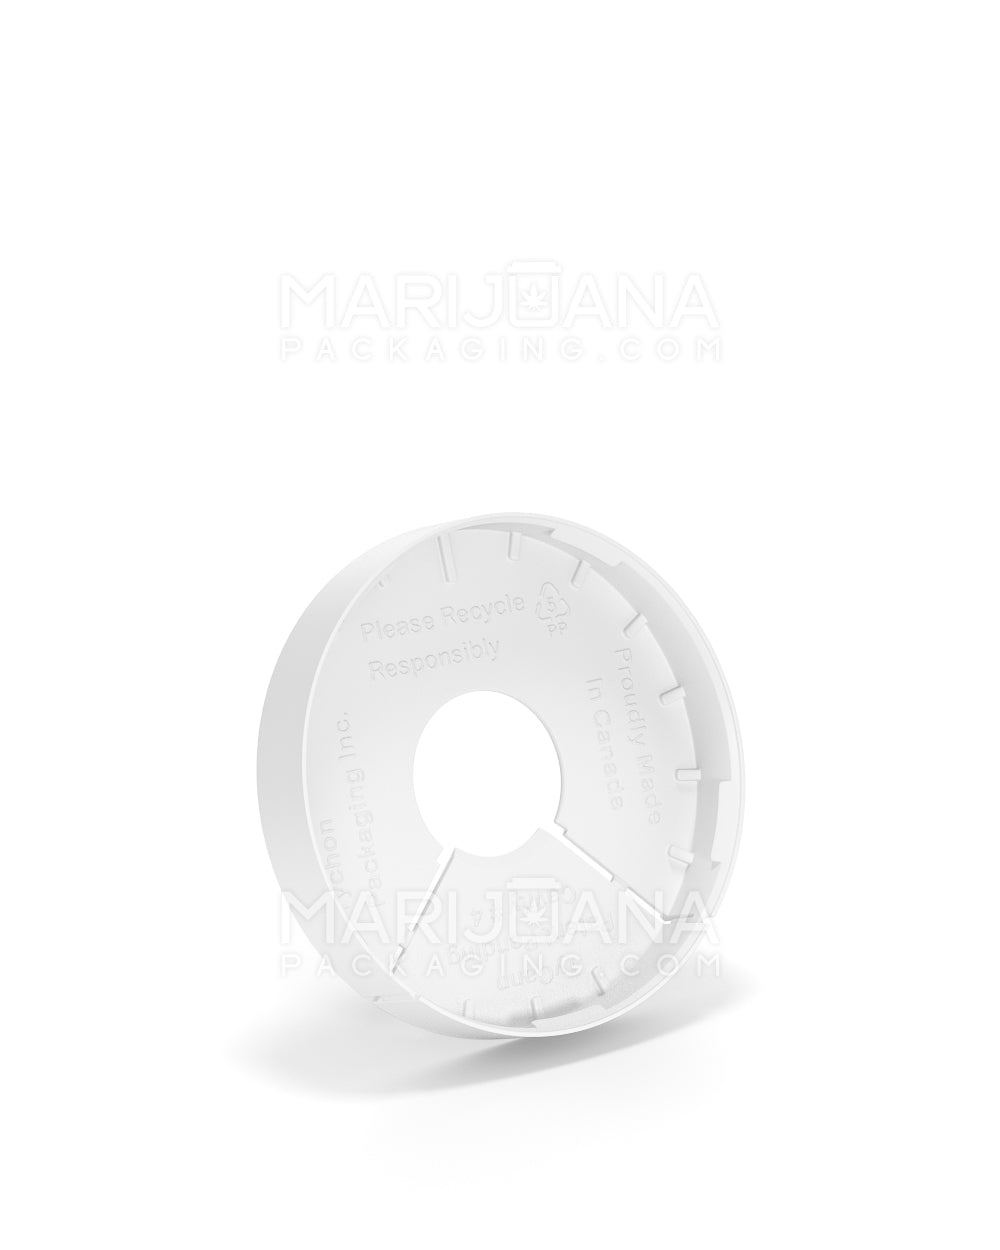 Child Resistant & Tamper Evident | Snap On Plastic Caps for Beverage Can | 53mm - Matte White - 1000 Count - 4